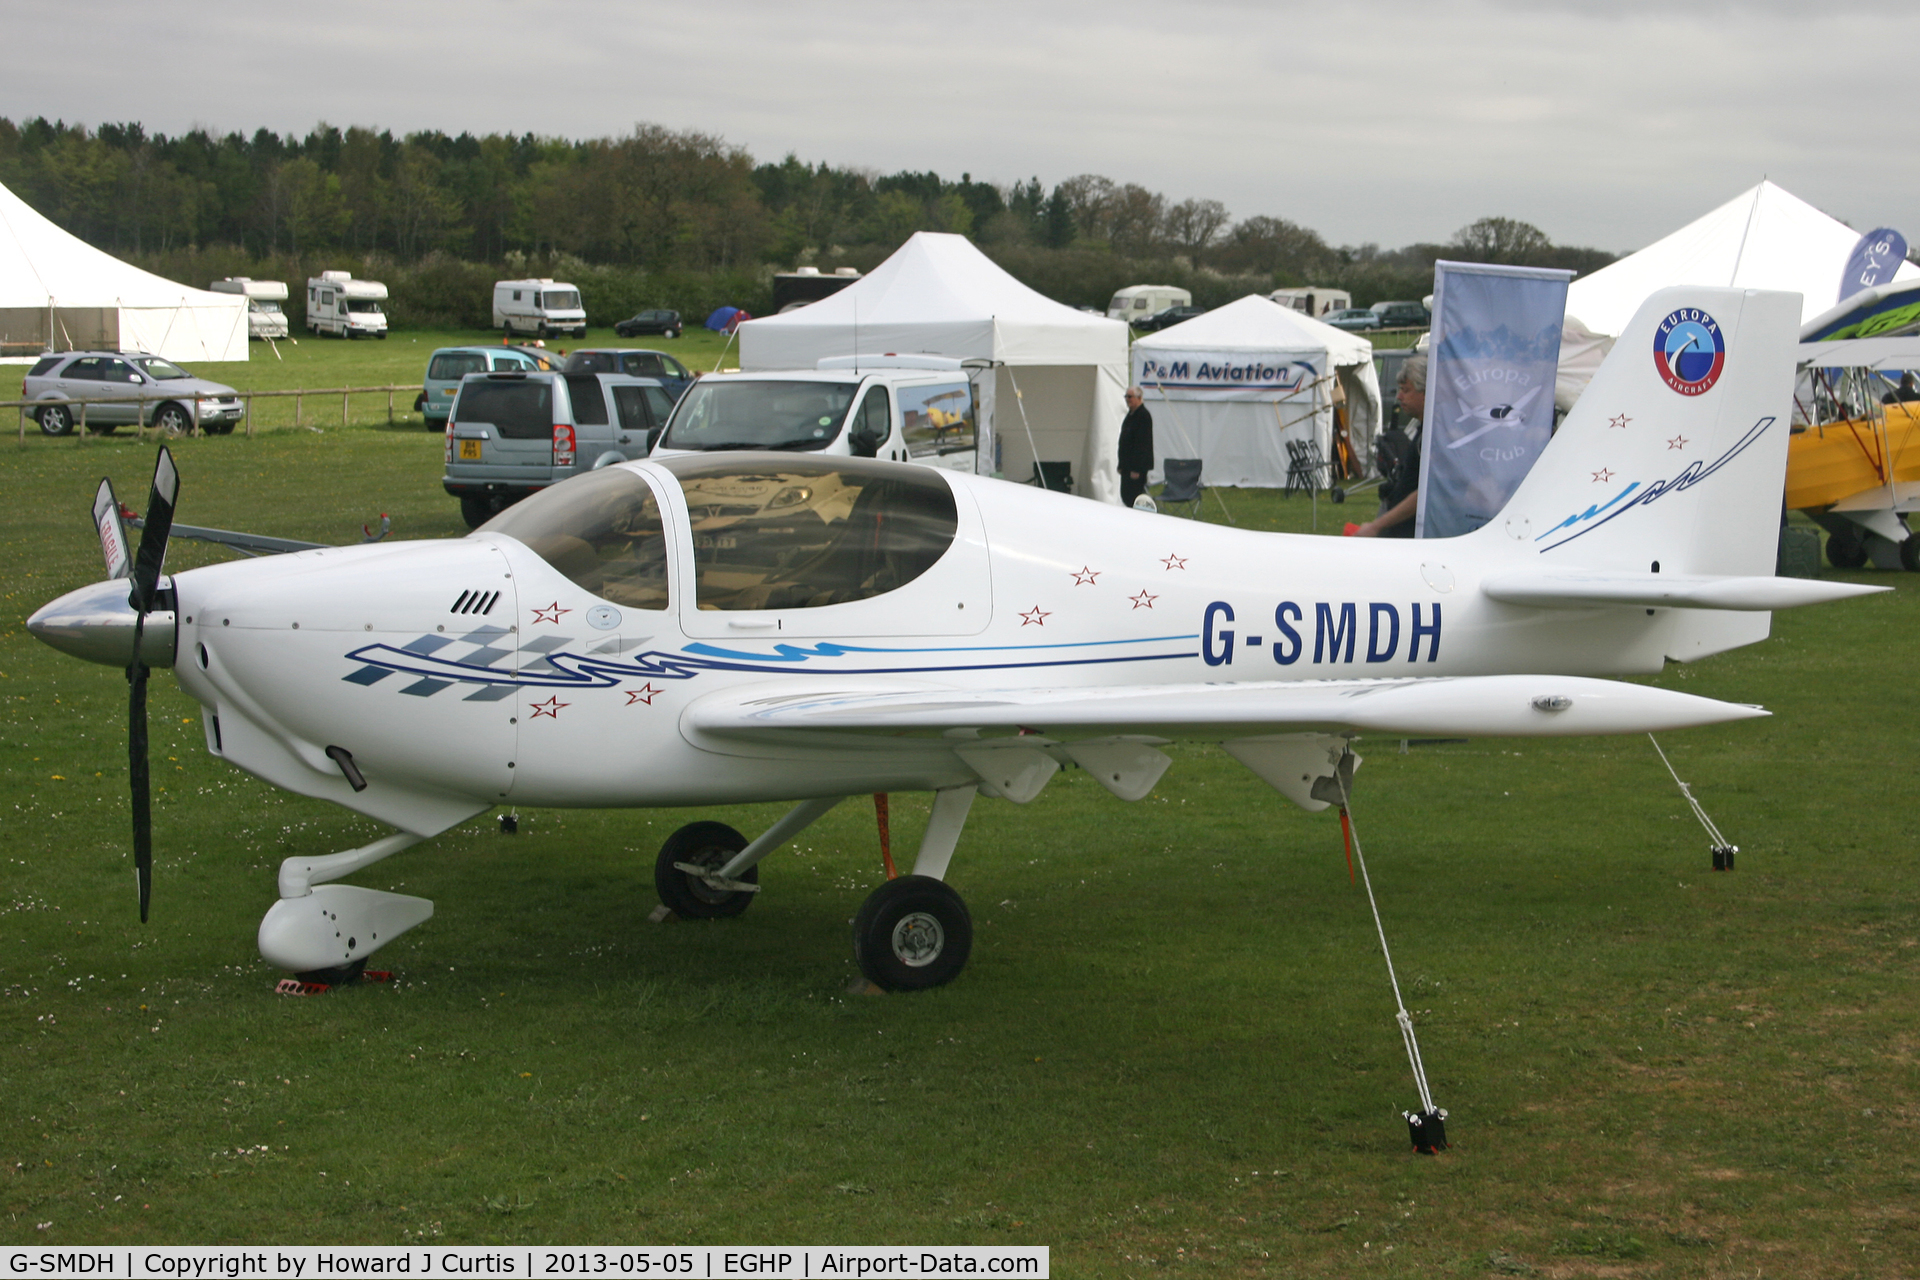 G-SMDH, 2006 Europa XS Tri-Gear C/N PFA 247-13367, Privately owned. At the Microlight Trade Fair.